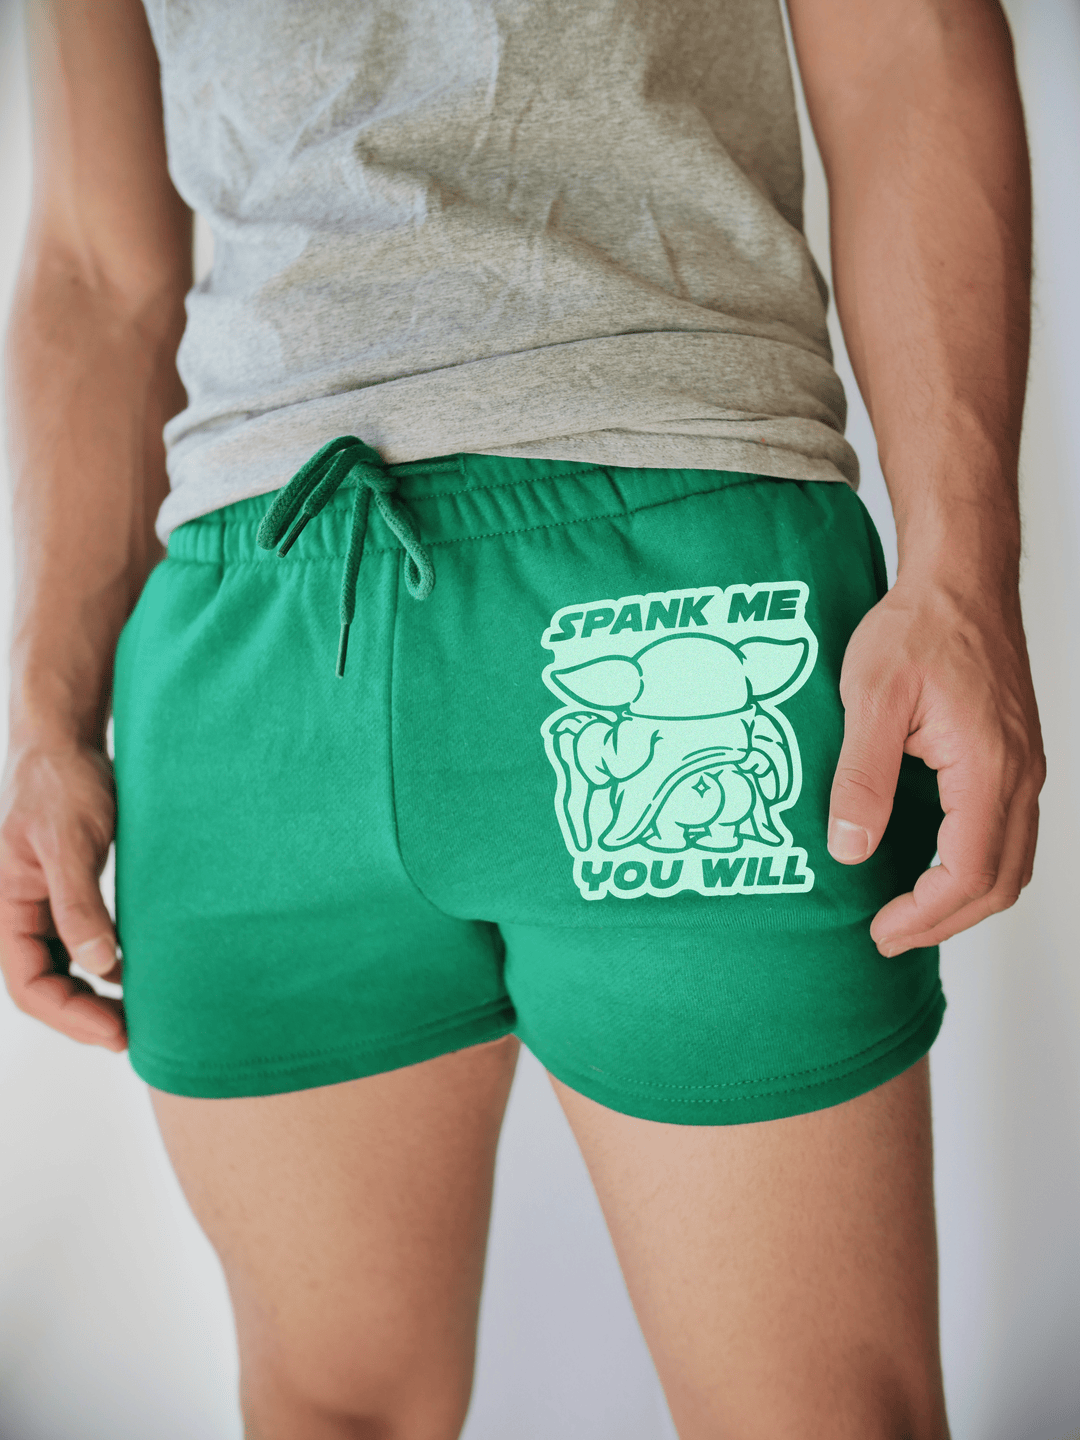 PixelThat Punderwear Shorts Kelly Green / S / Front Spank Me You Will Men's Gym Shorts